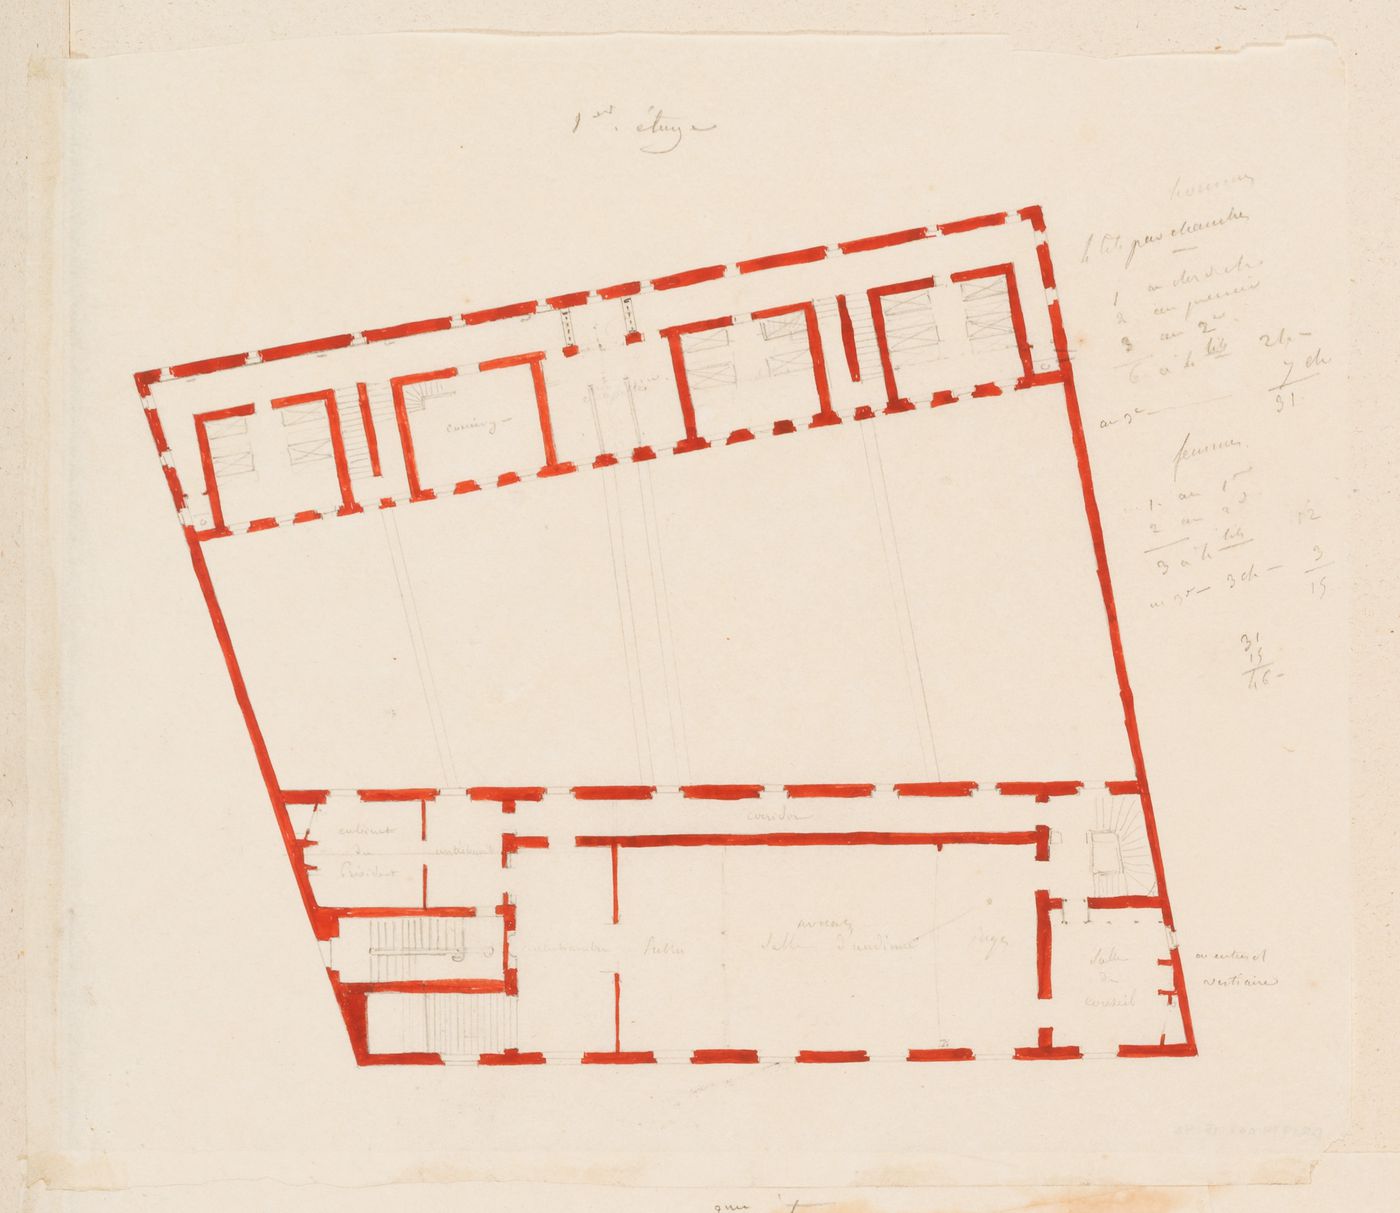 Palais de justice and prison, Toulon, France: Plan of the first floor